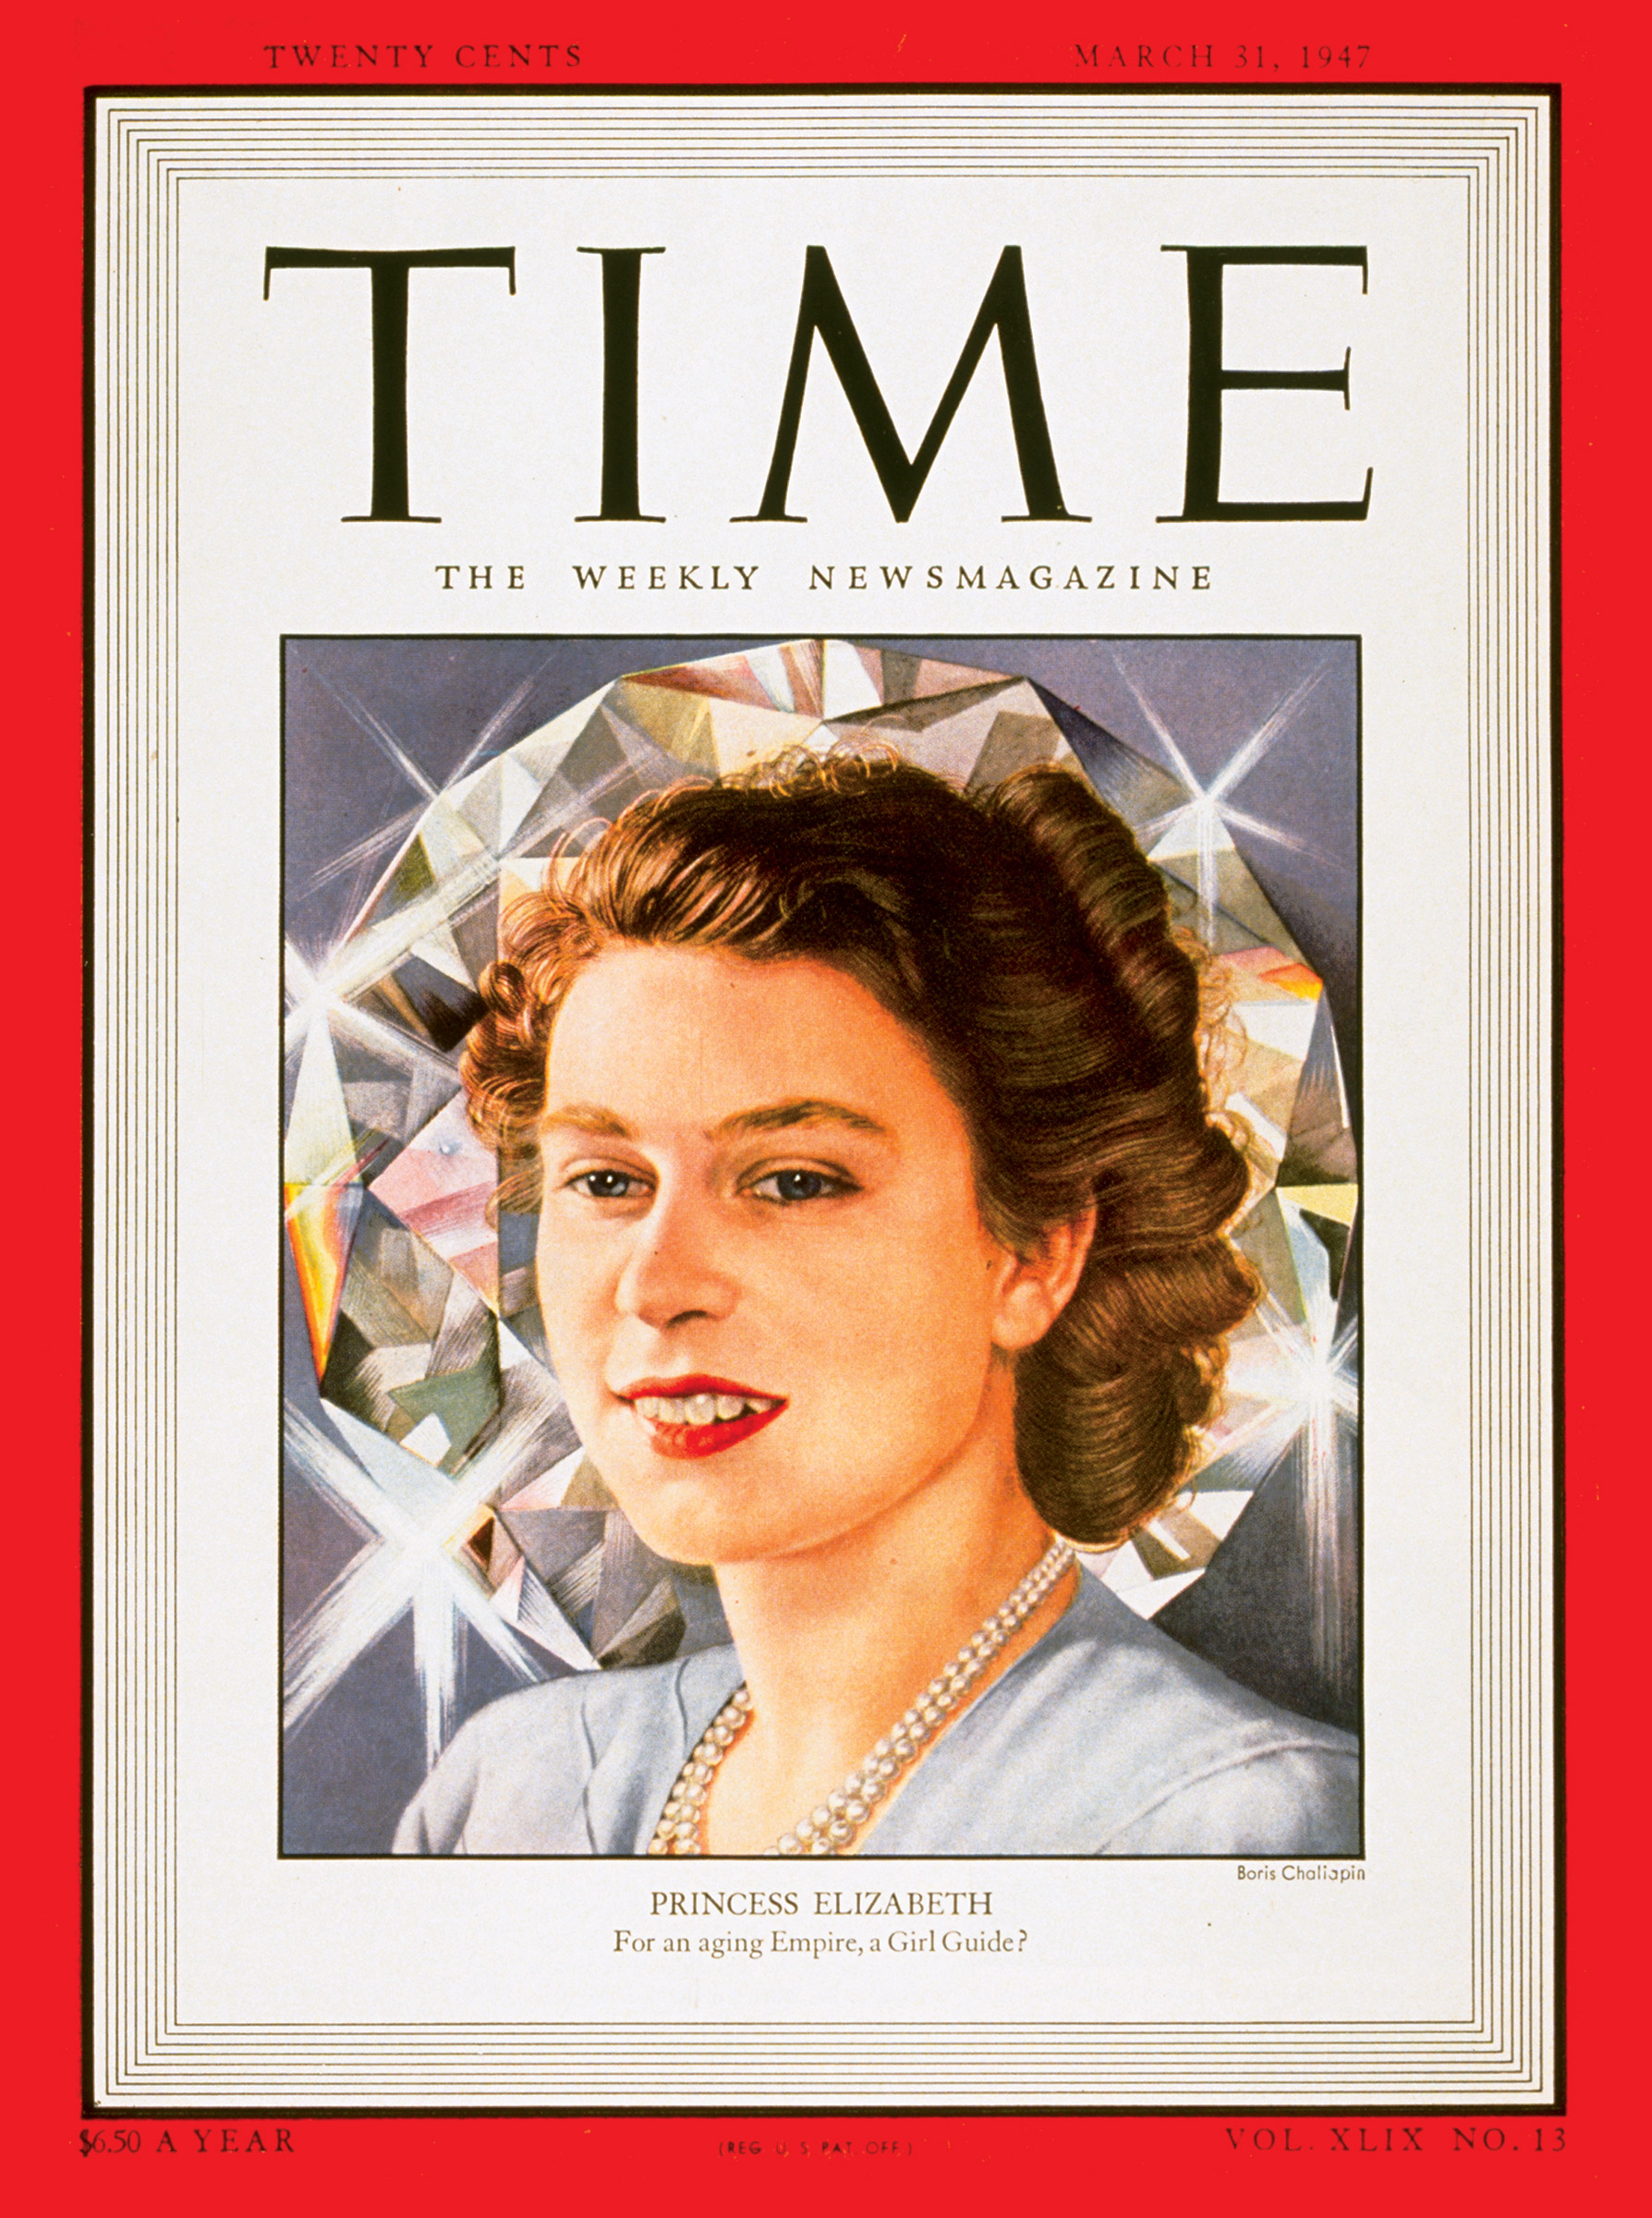 Then-Princess Elizabeth on the Mar. 31, 1947, cover of TIME (Boris Chaliapin)